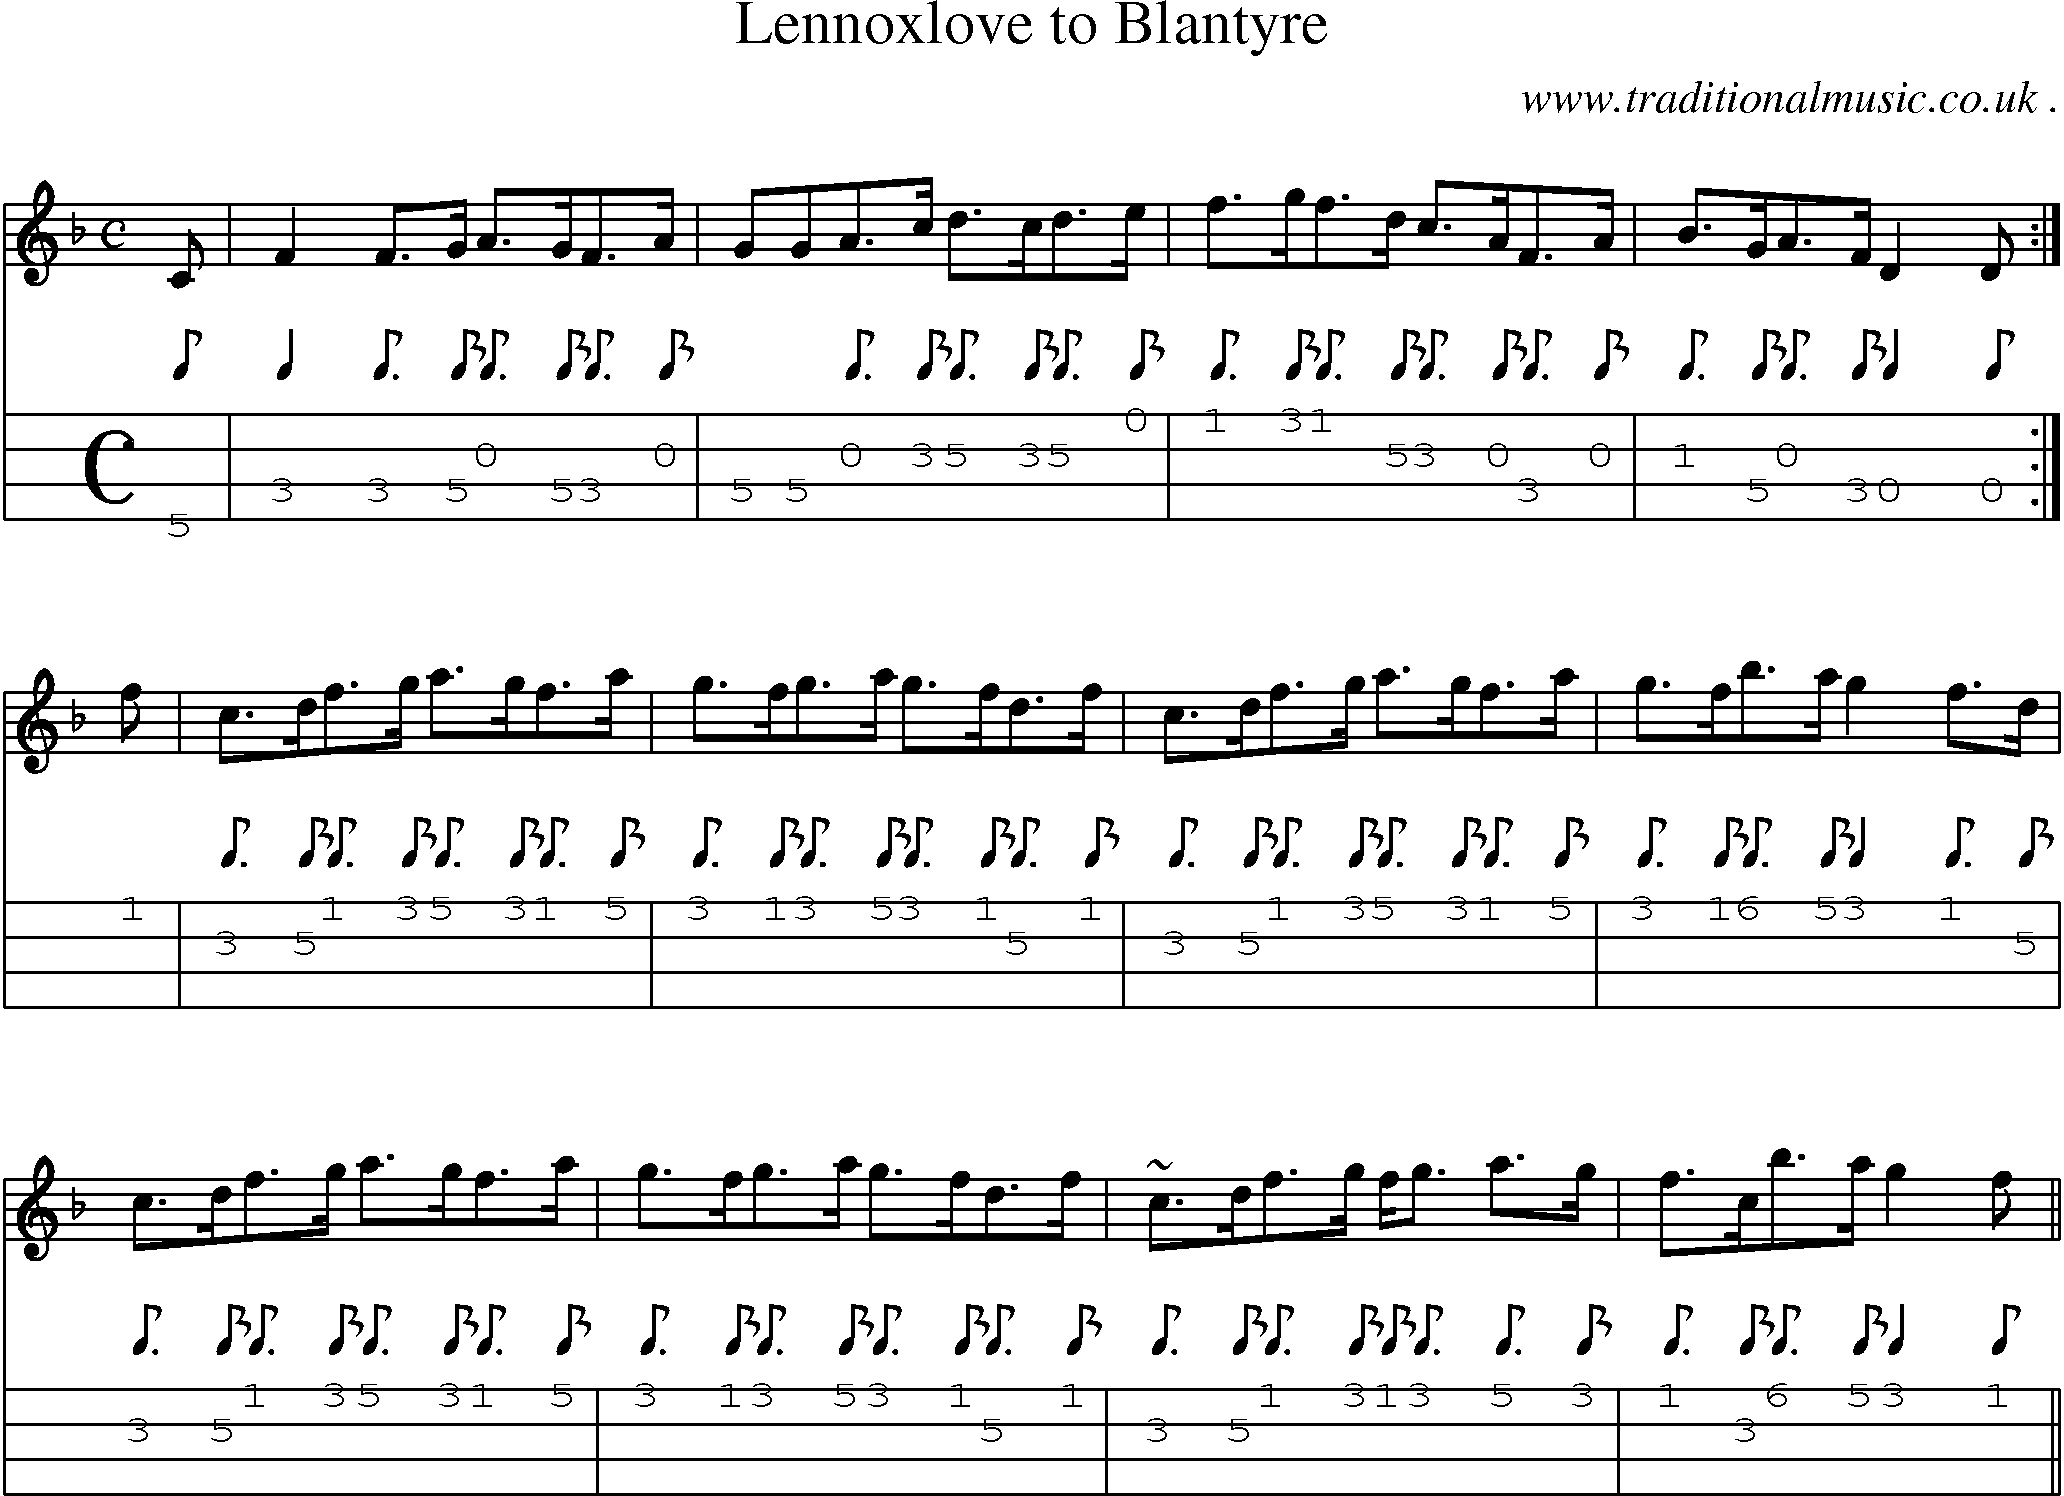 Sheet-music  score, Chords and Mandolin Tabs for Lennoxlove To Blantyre